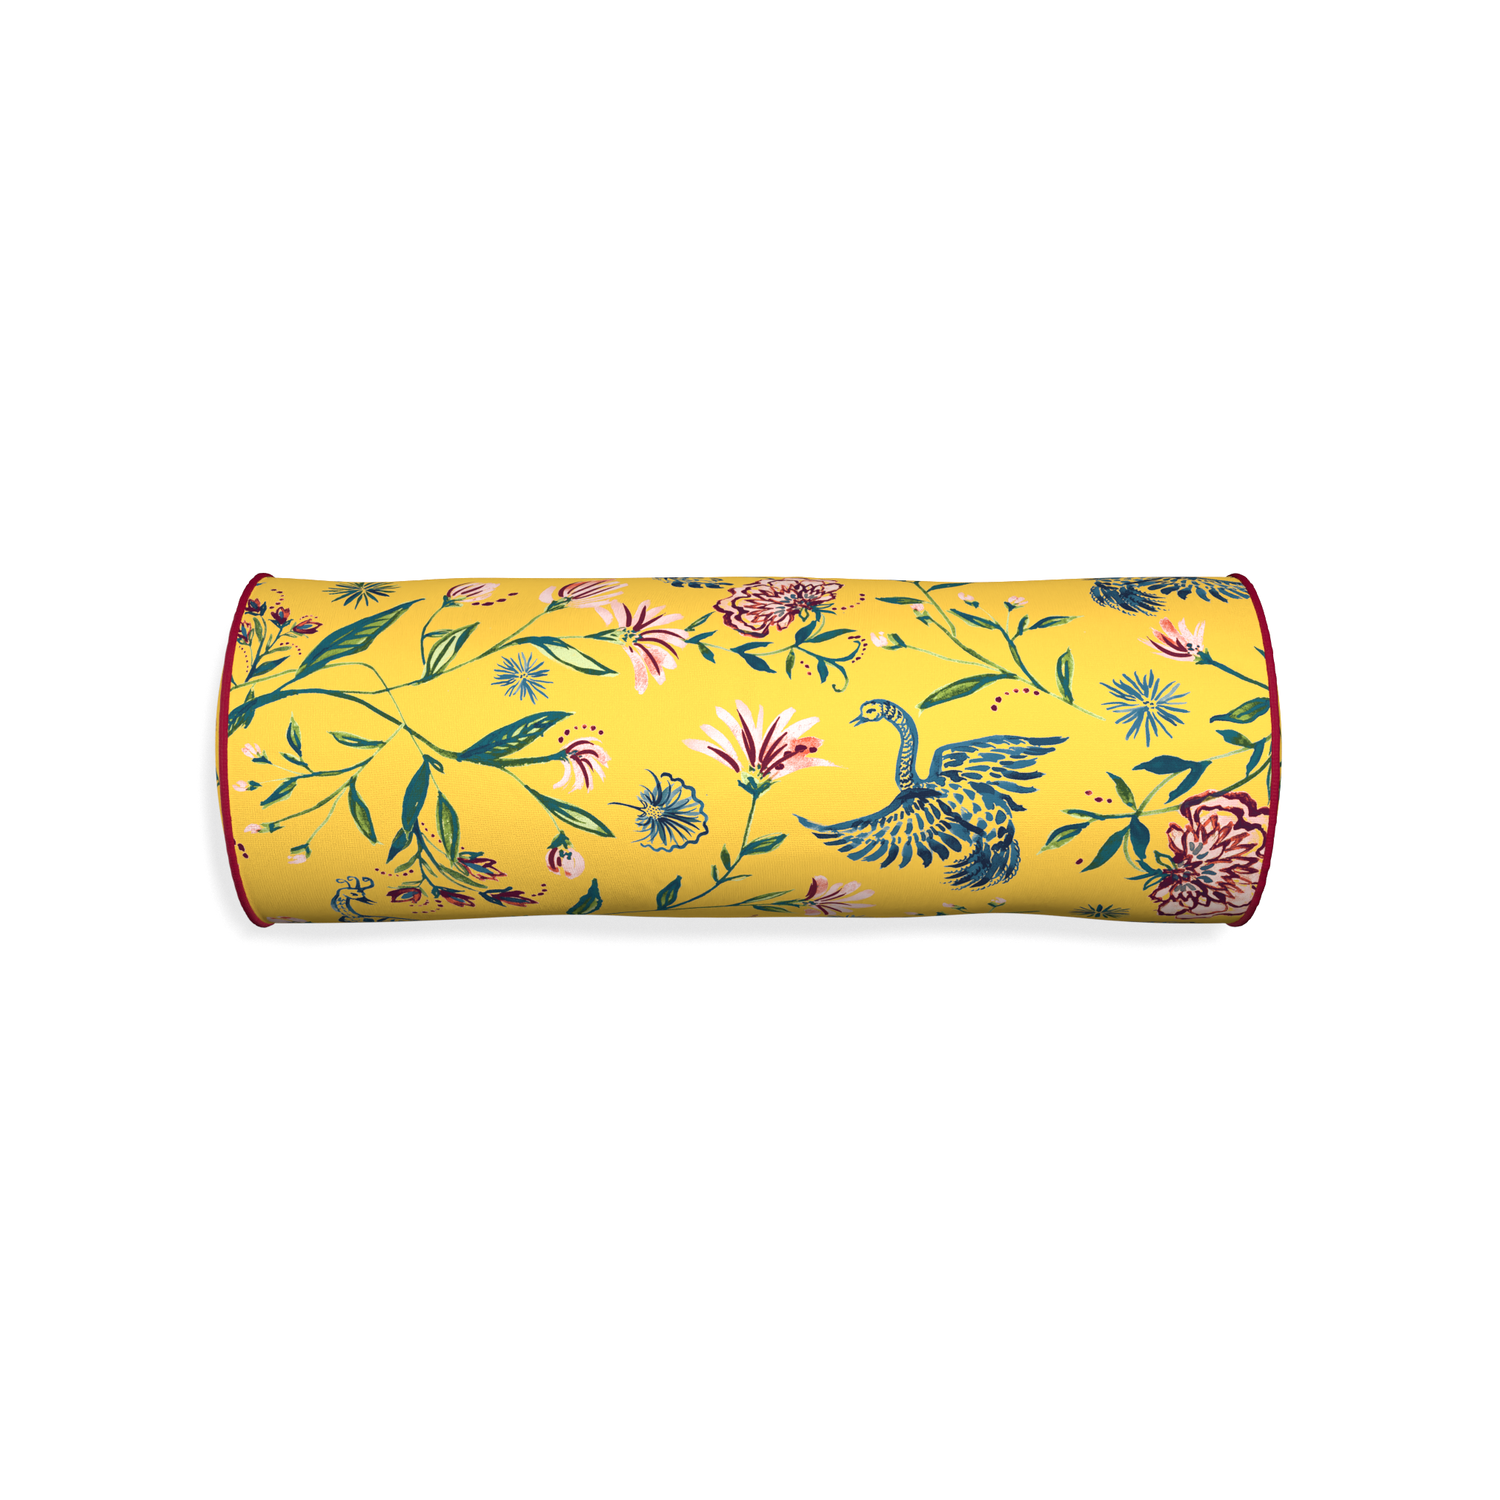 Bolster daphne canary custom pillow with raspberry piping on white background